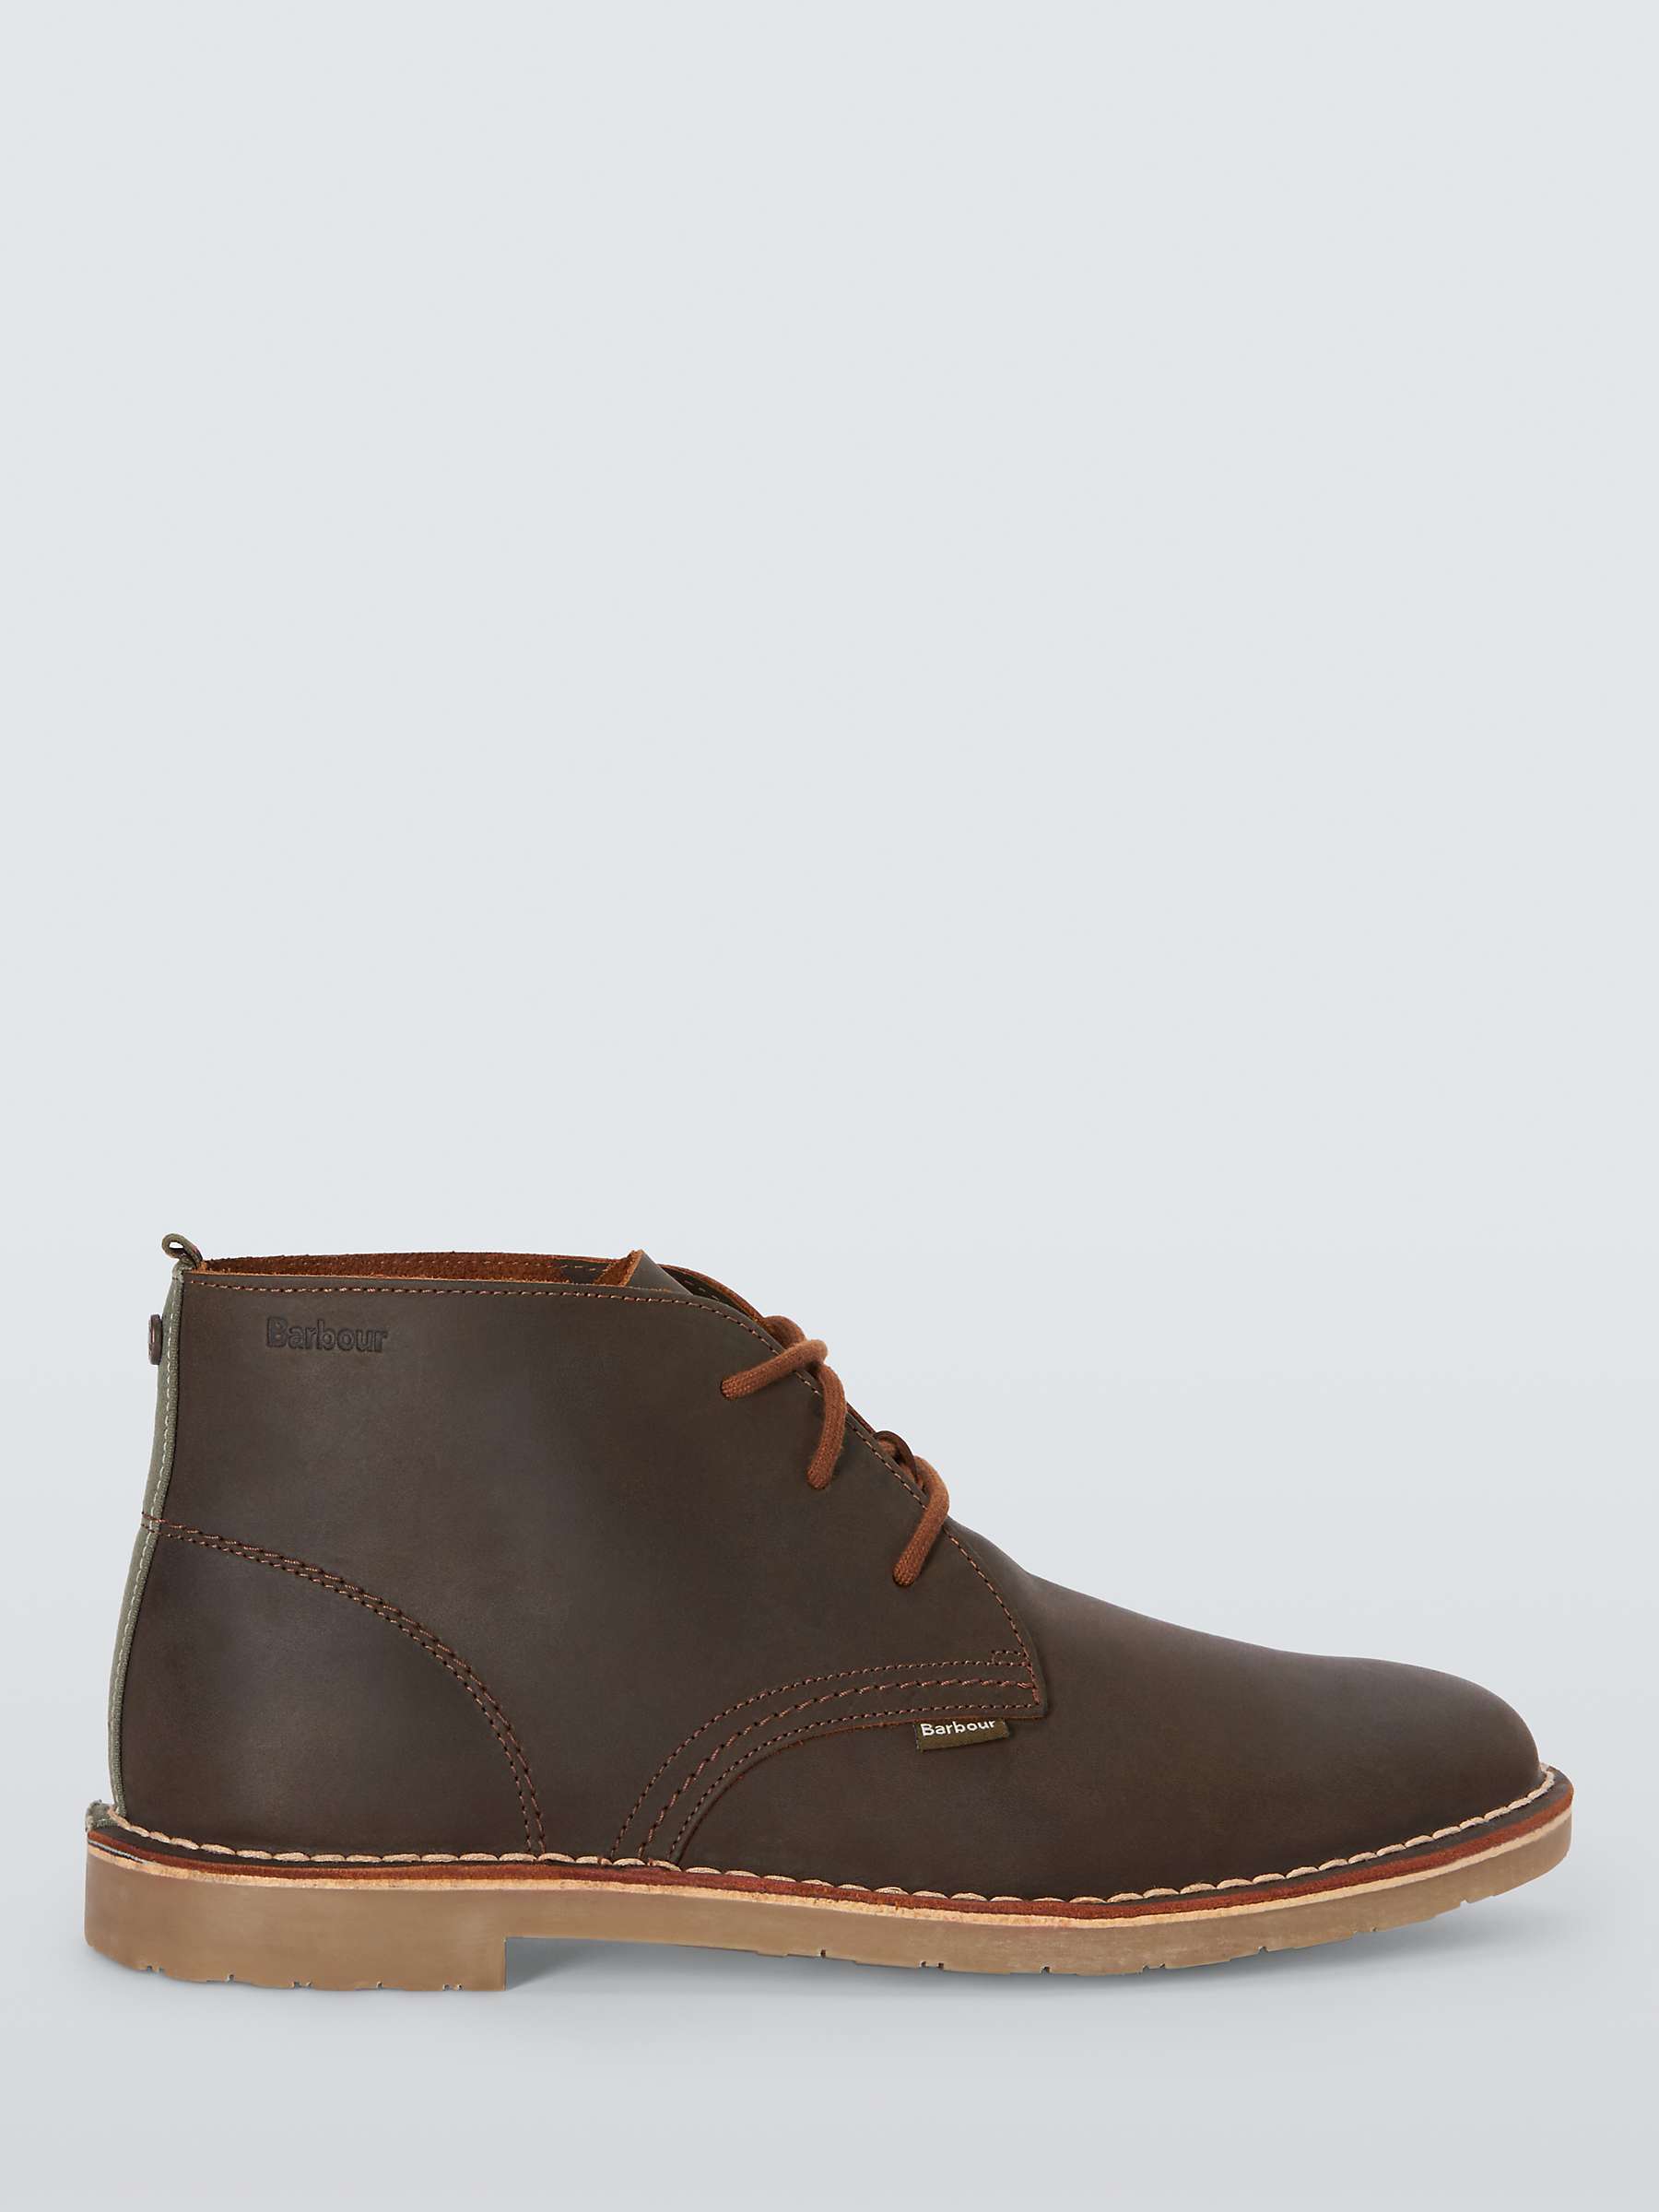 Buy Barbour Siton Leather Desert Boots, Beeswax Online at johnlewis.com